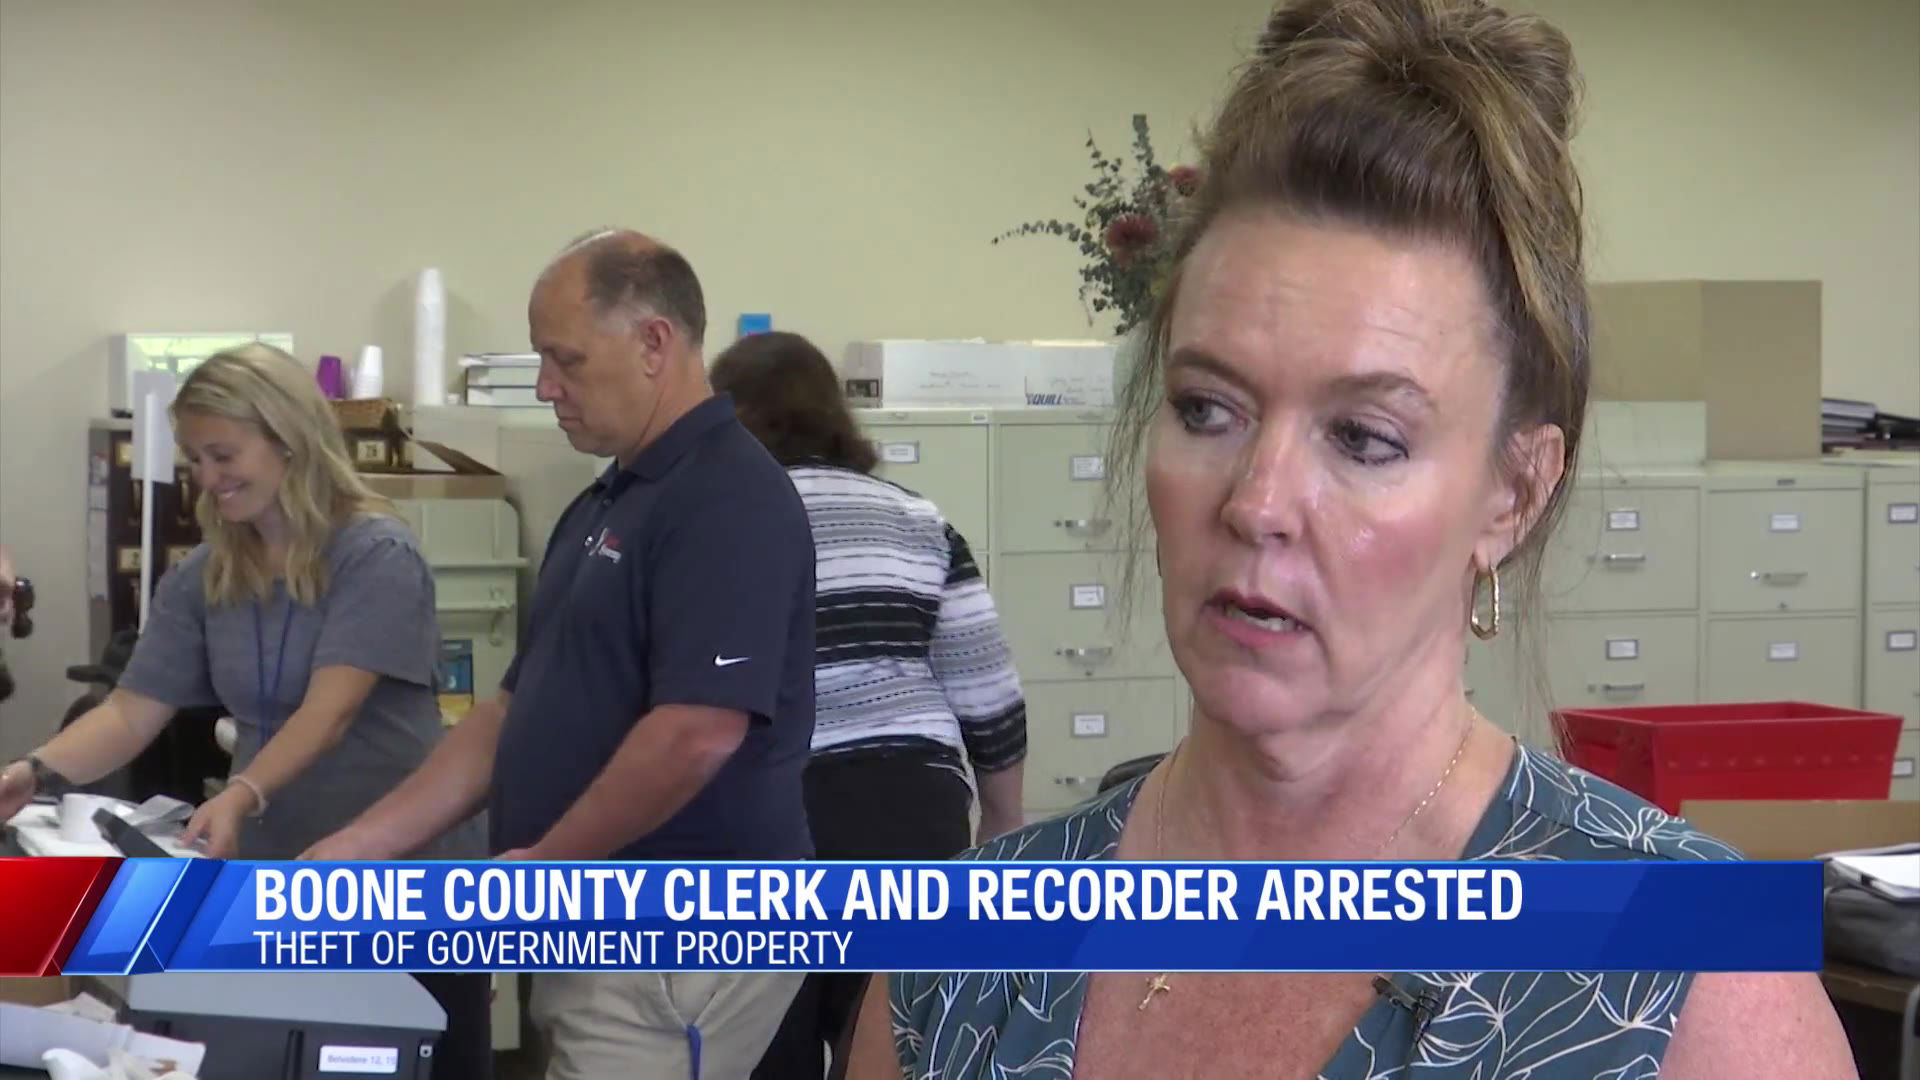 Illinois county clerk arrested charged with theft of government property